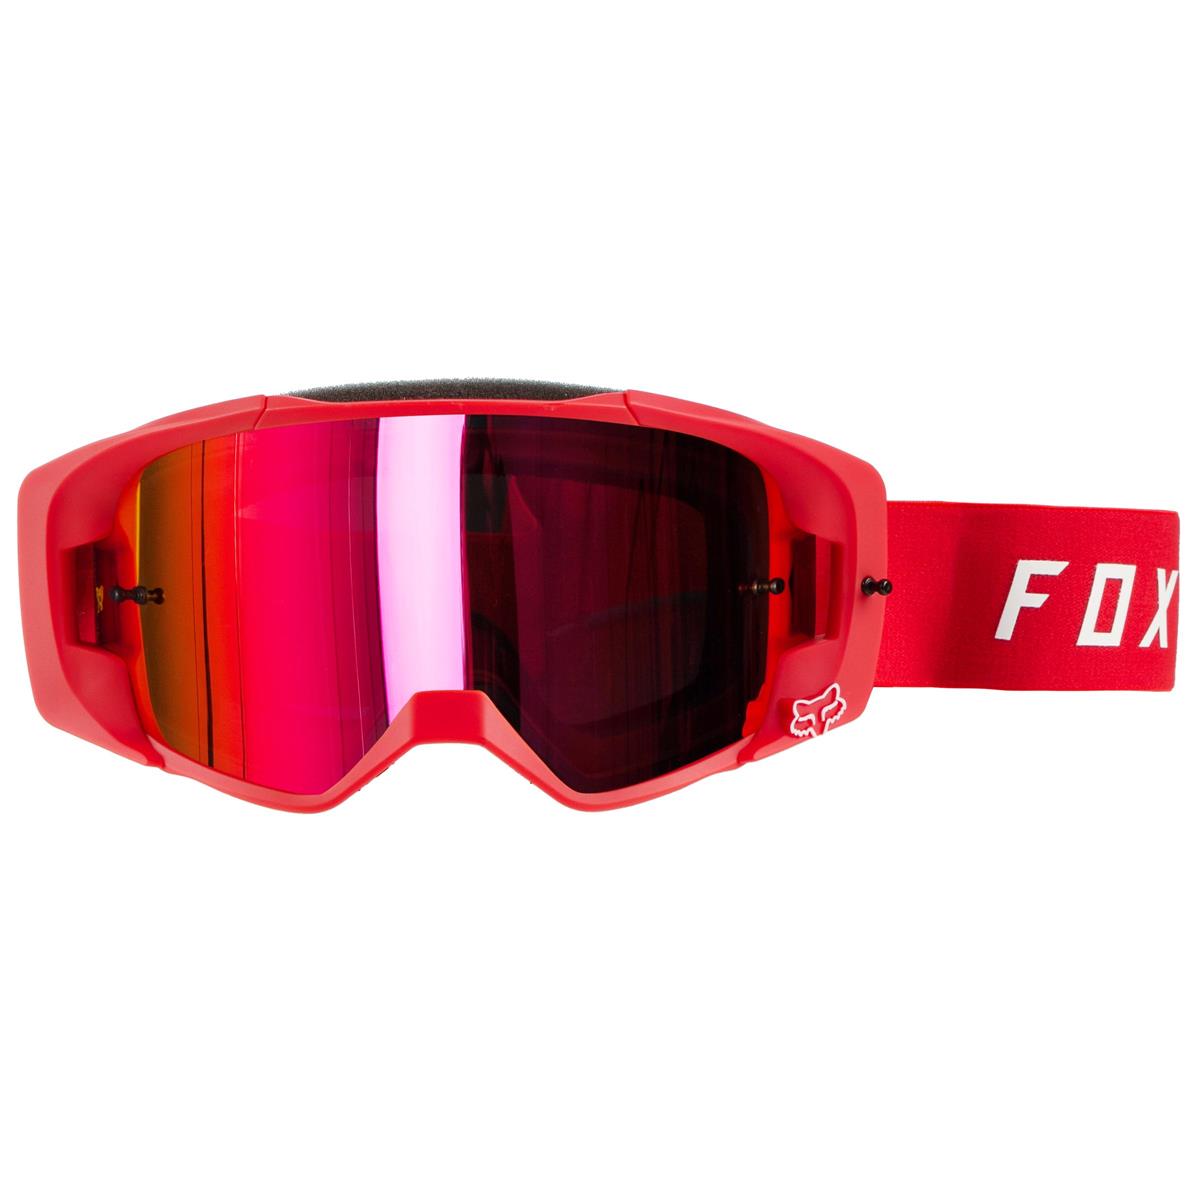 Fox Goggle VUE Red - Red mirrored, Anti-Fog